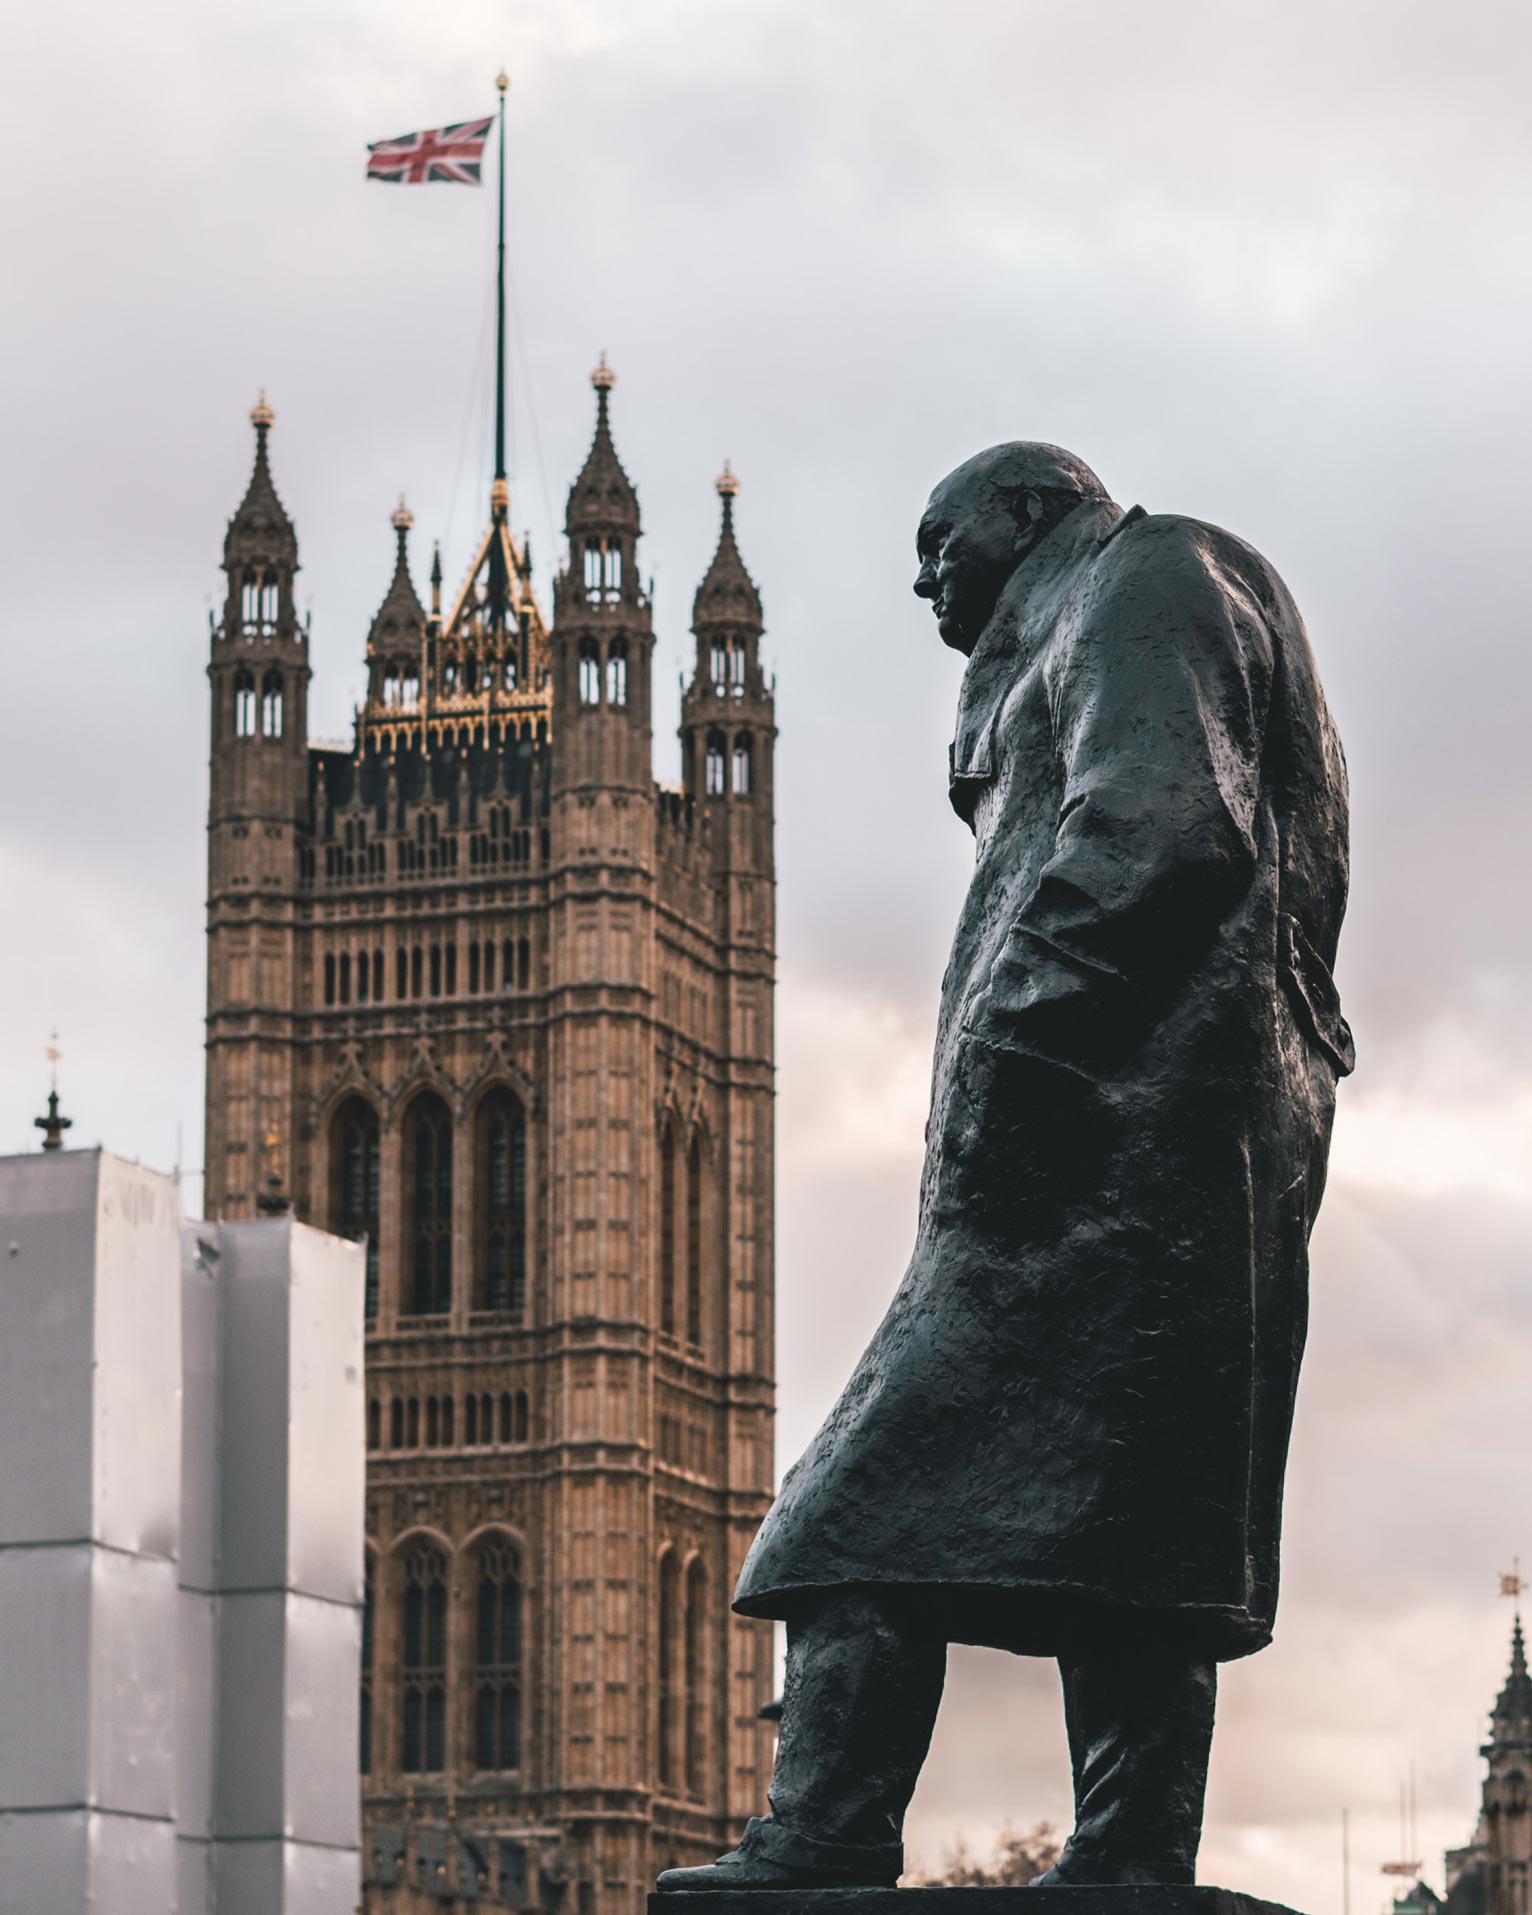 From Winston Churchill is probably the most famous quote on democracy. Photo by Arthur Osipyan on unsplash.